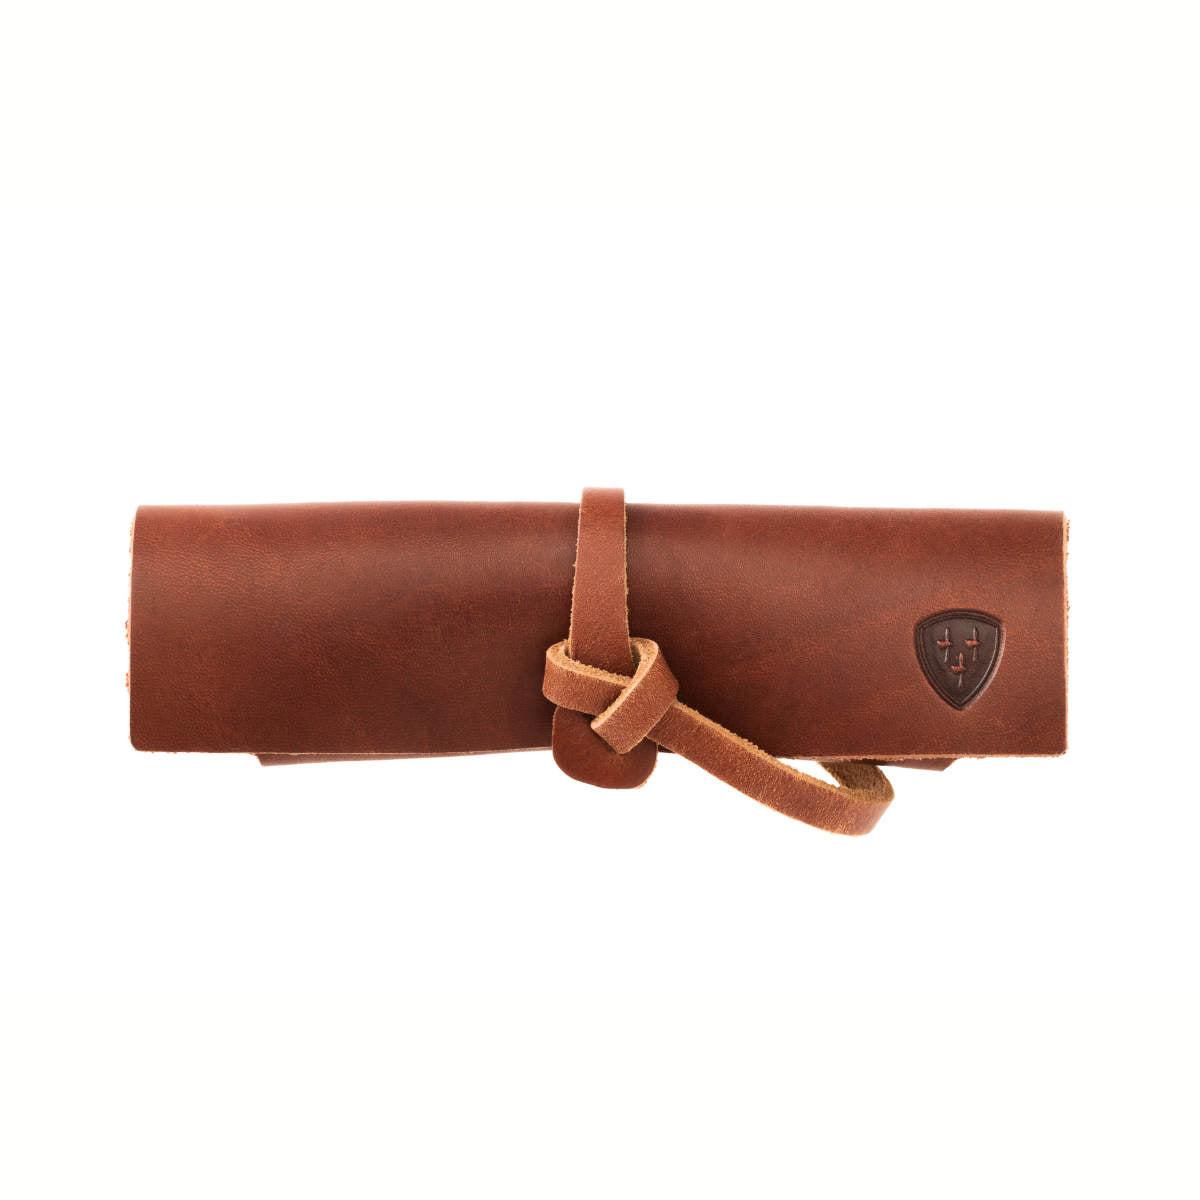 Sharpening stone S with leather holster